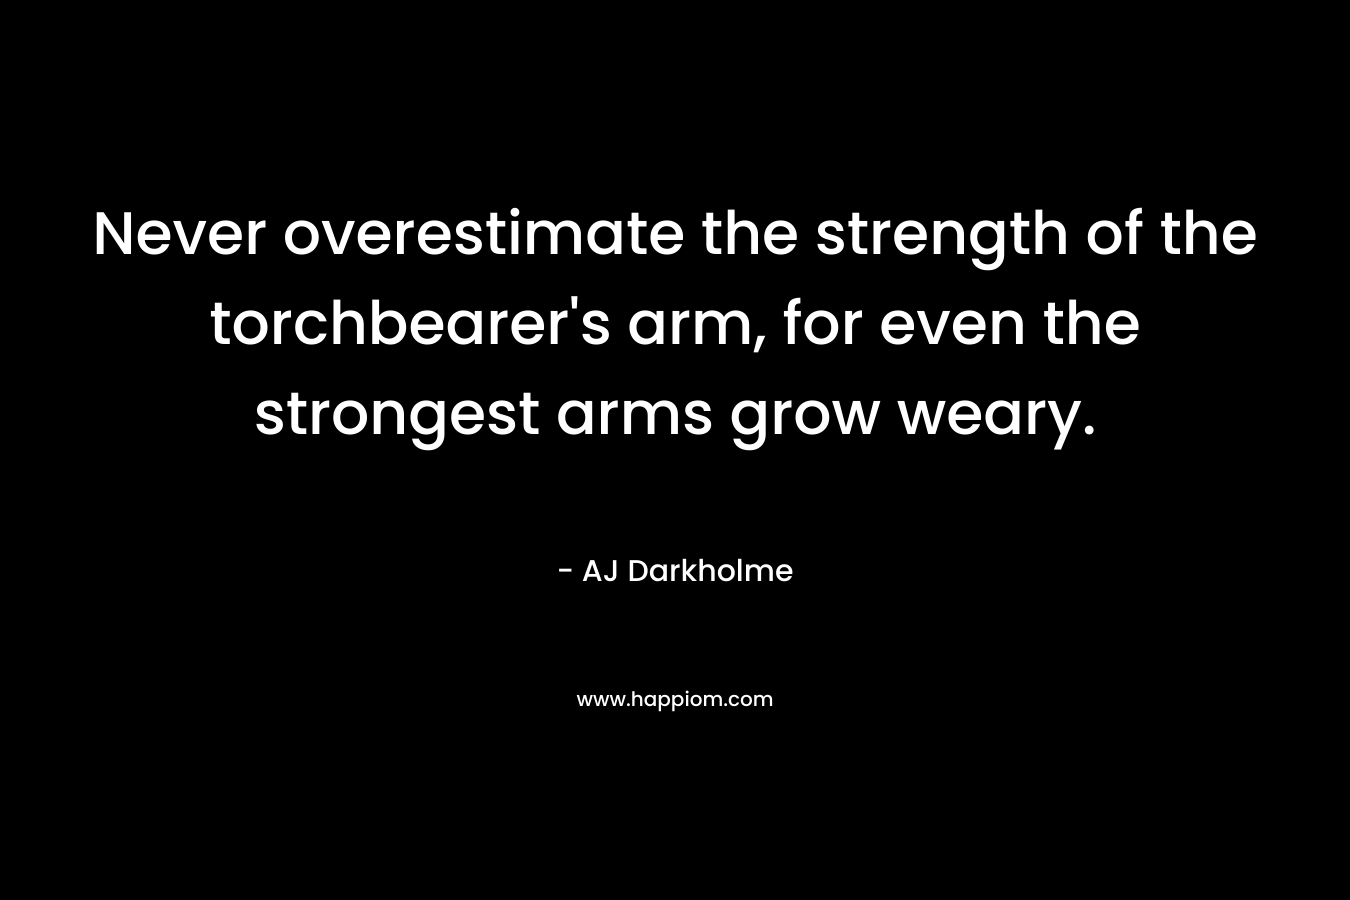 Never overestimate the strength of the torchbearer's arm, for even the strongest arms grow weary.